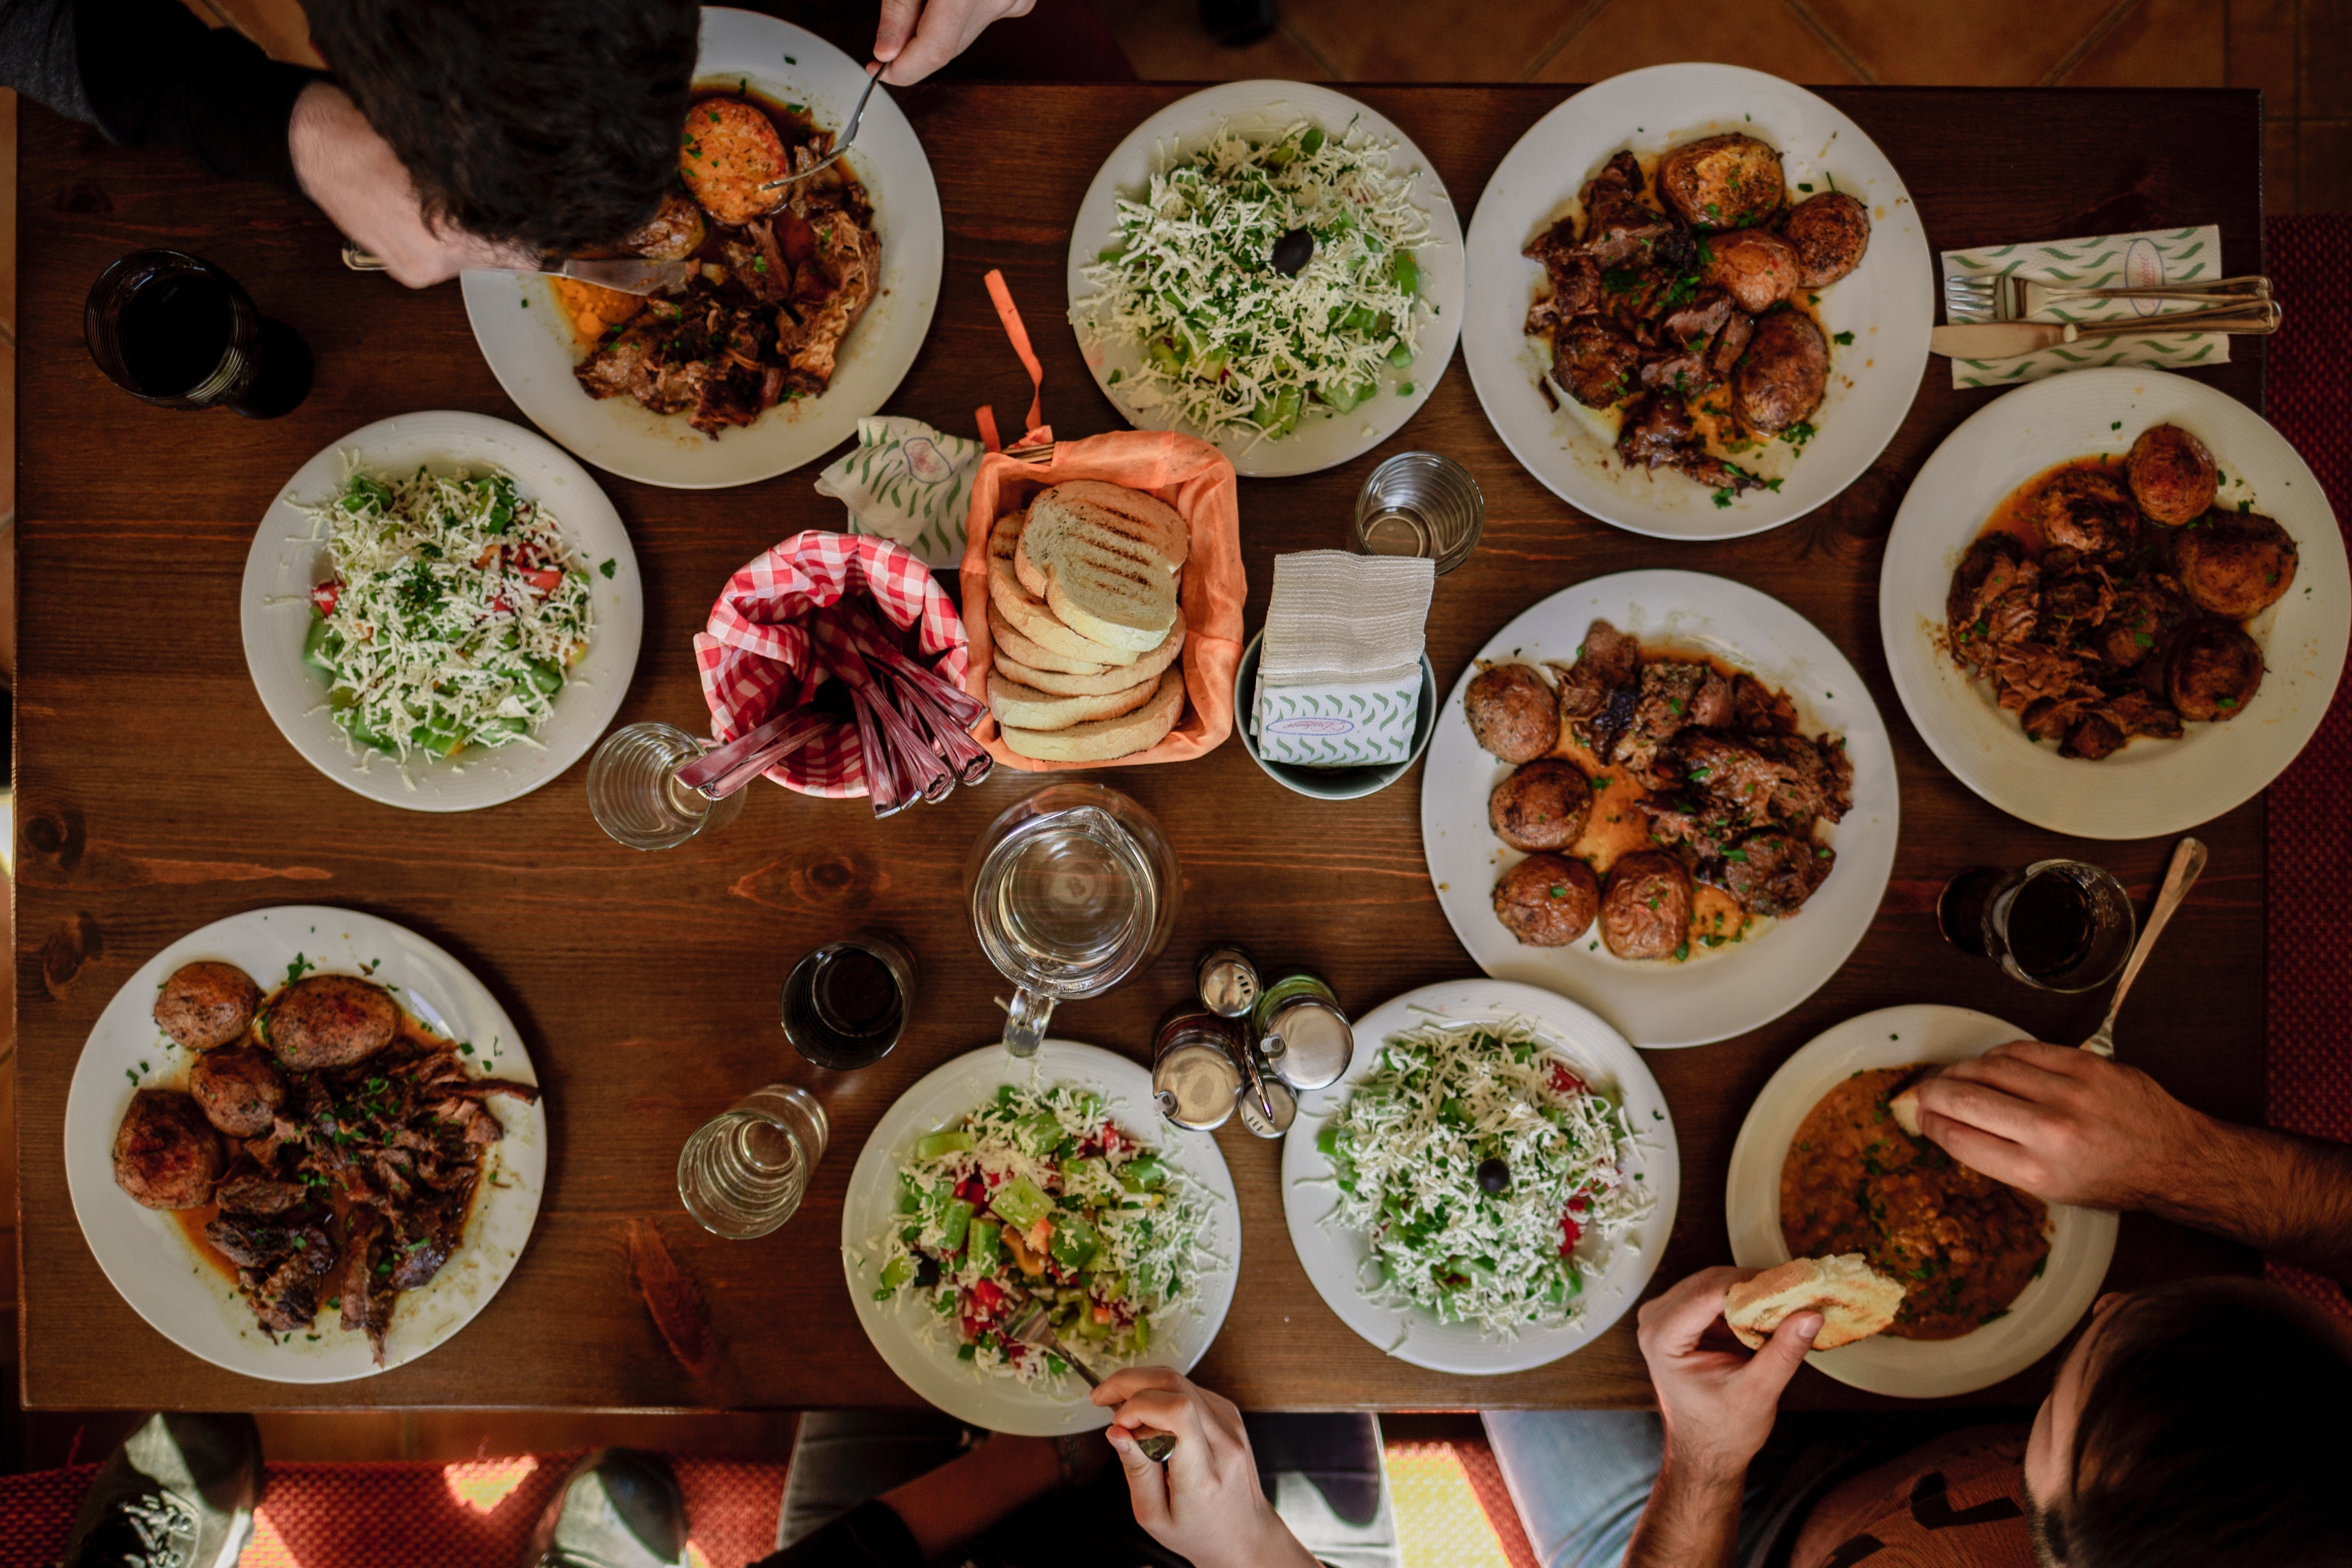 A table full of various dishes is photographed from above. Multiple people enjoy potatoes, salads, and bread in close proximity to one another.